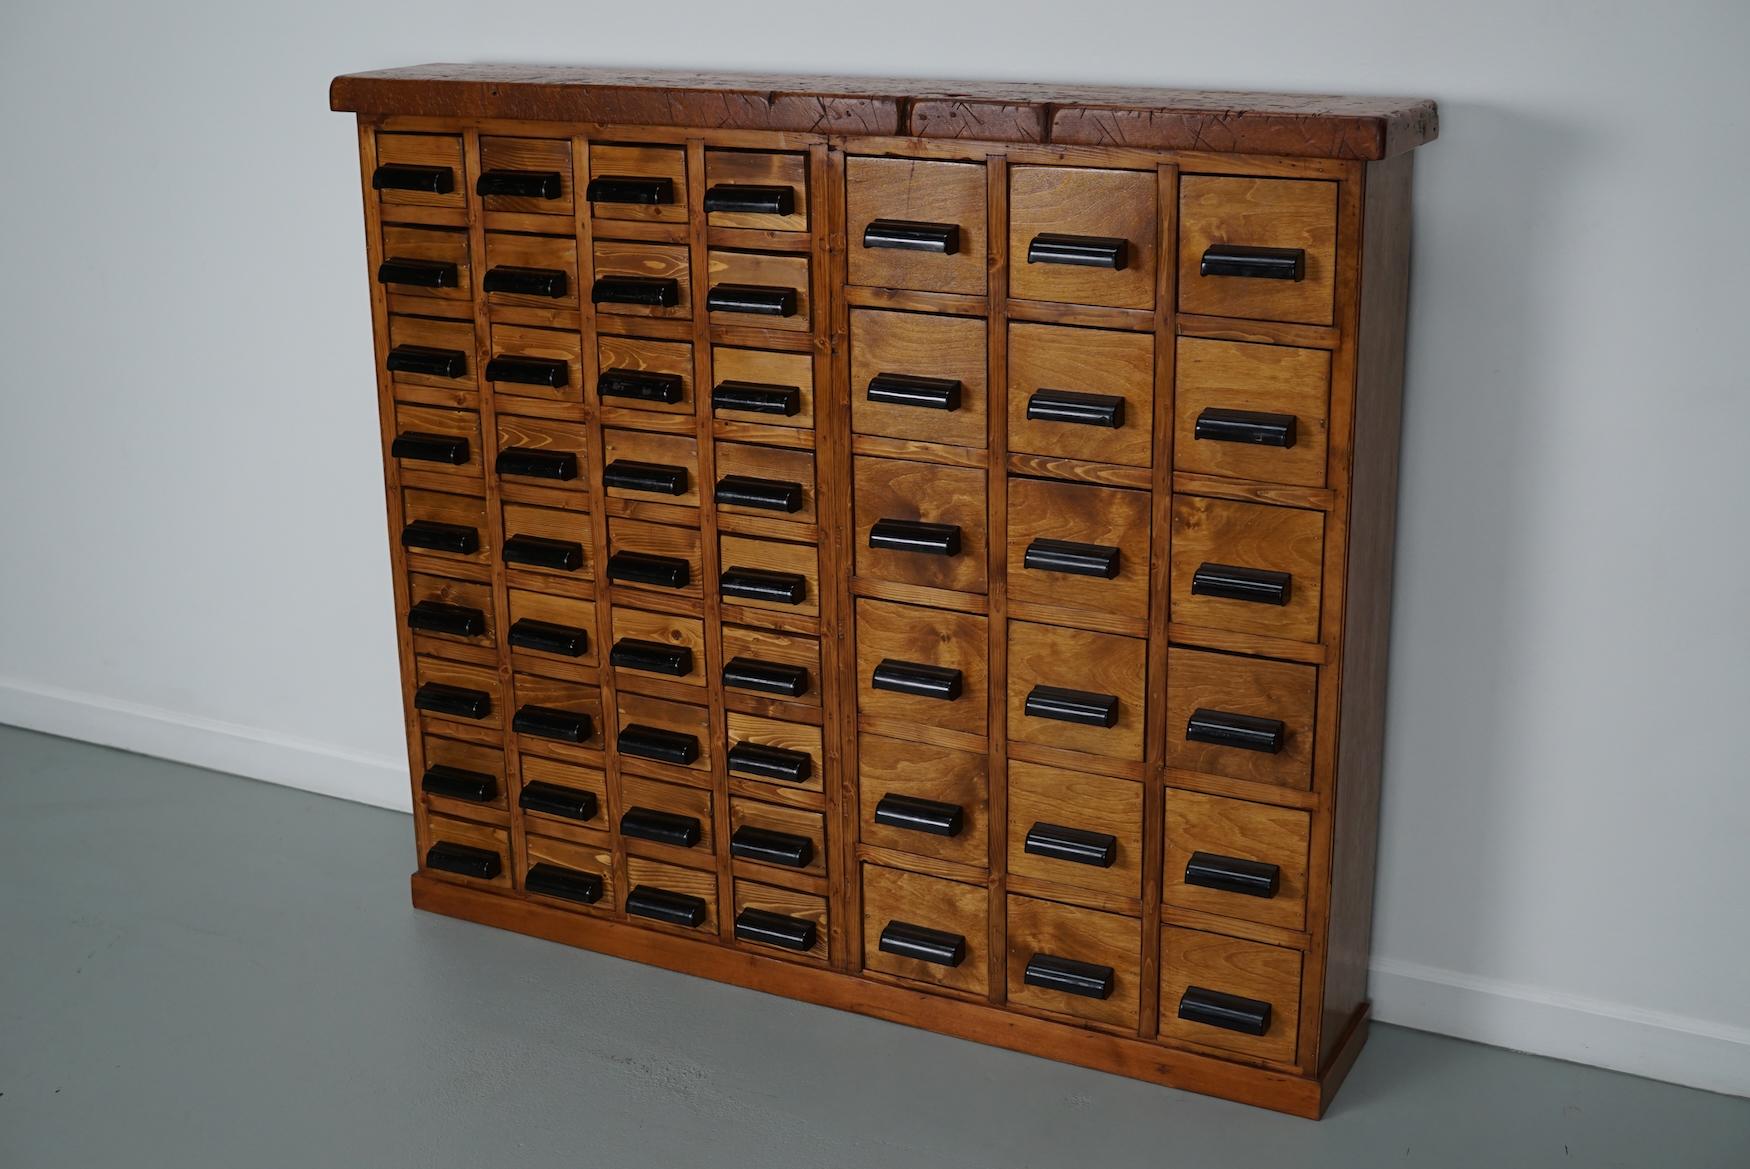 This workshop cabinet was made from pine / beech ply in the Netherlands circa 1950s and it was used in a workshop for dentist equipment. It features many drawers with nice bakelite handles. The interior dimensions of the drawers are: DWH 13 x 9 x